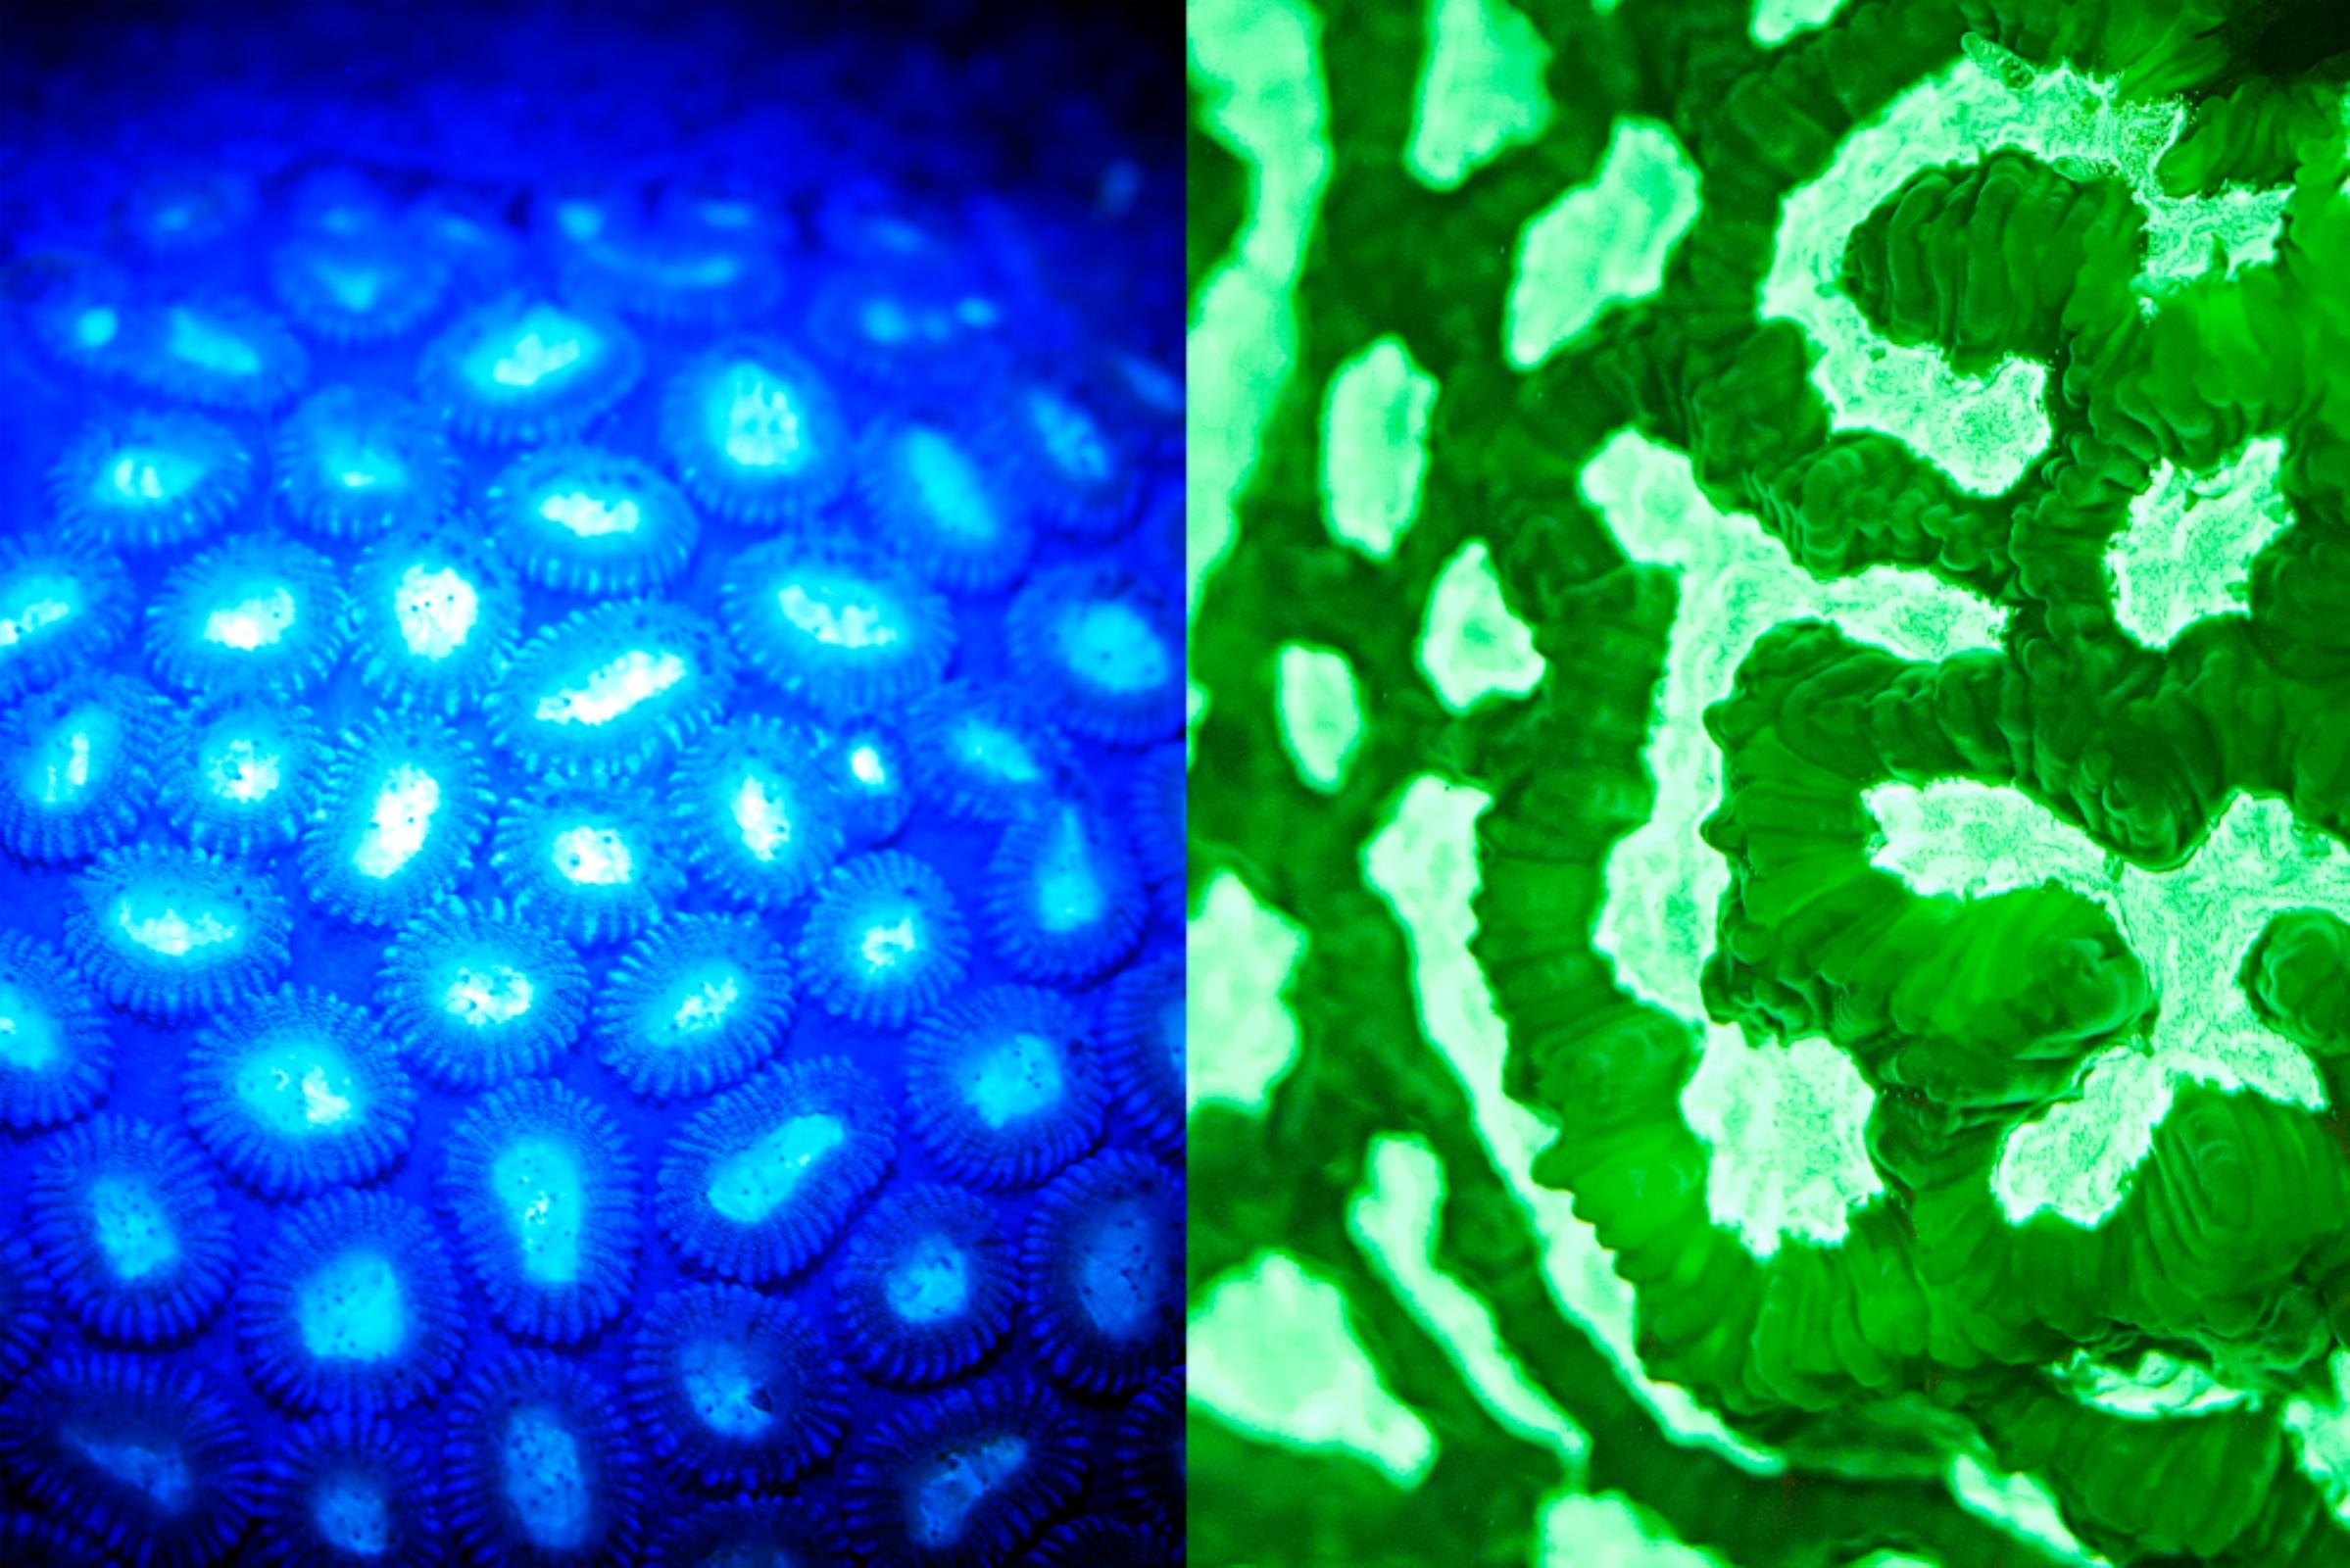 Left: We sie a mixture of blue light and fluorescence.
Right: The yellow filters eliminate blue light and pure fluorescence is achieved
